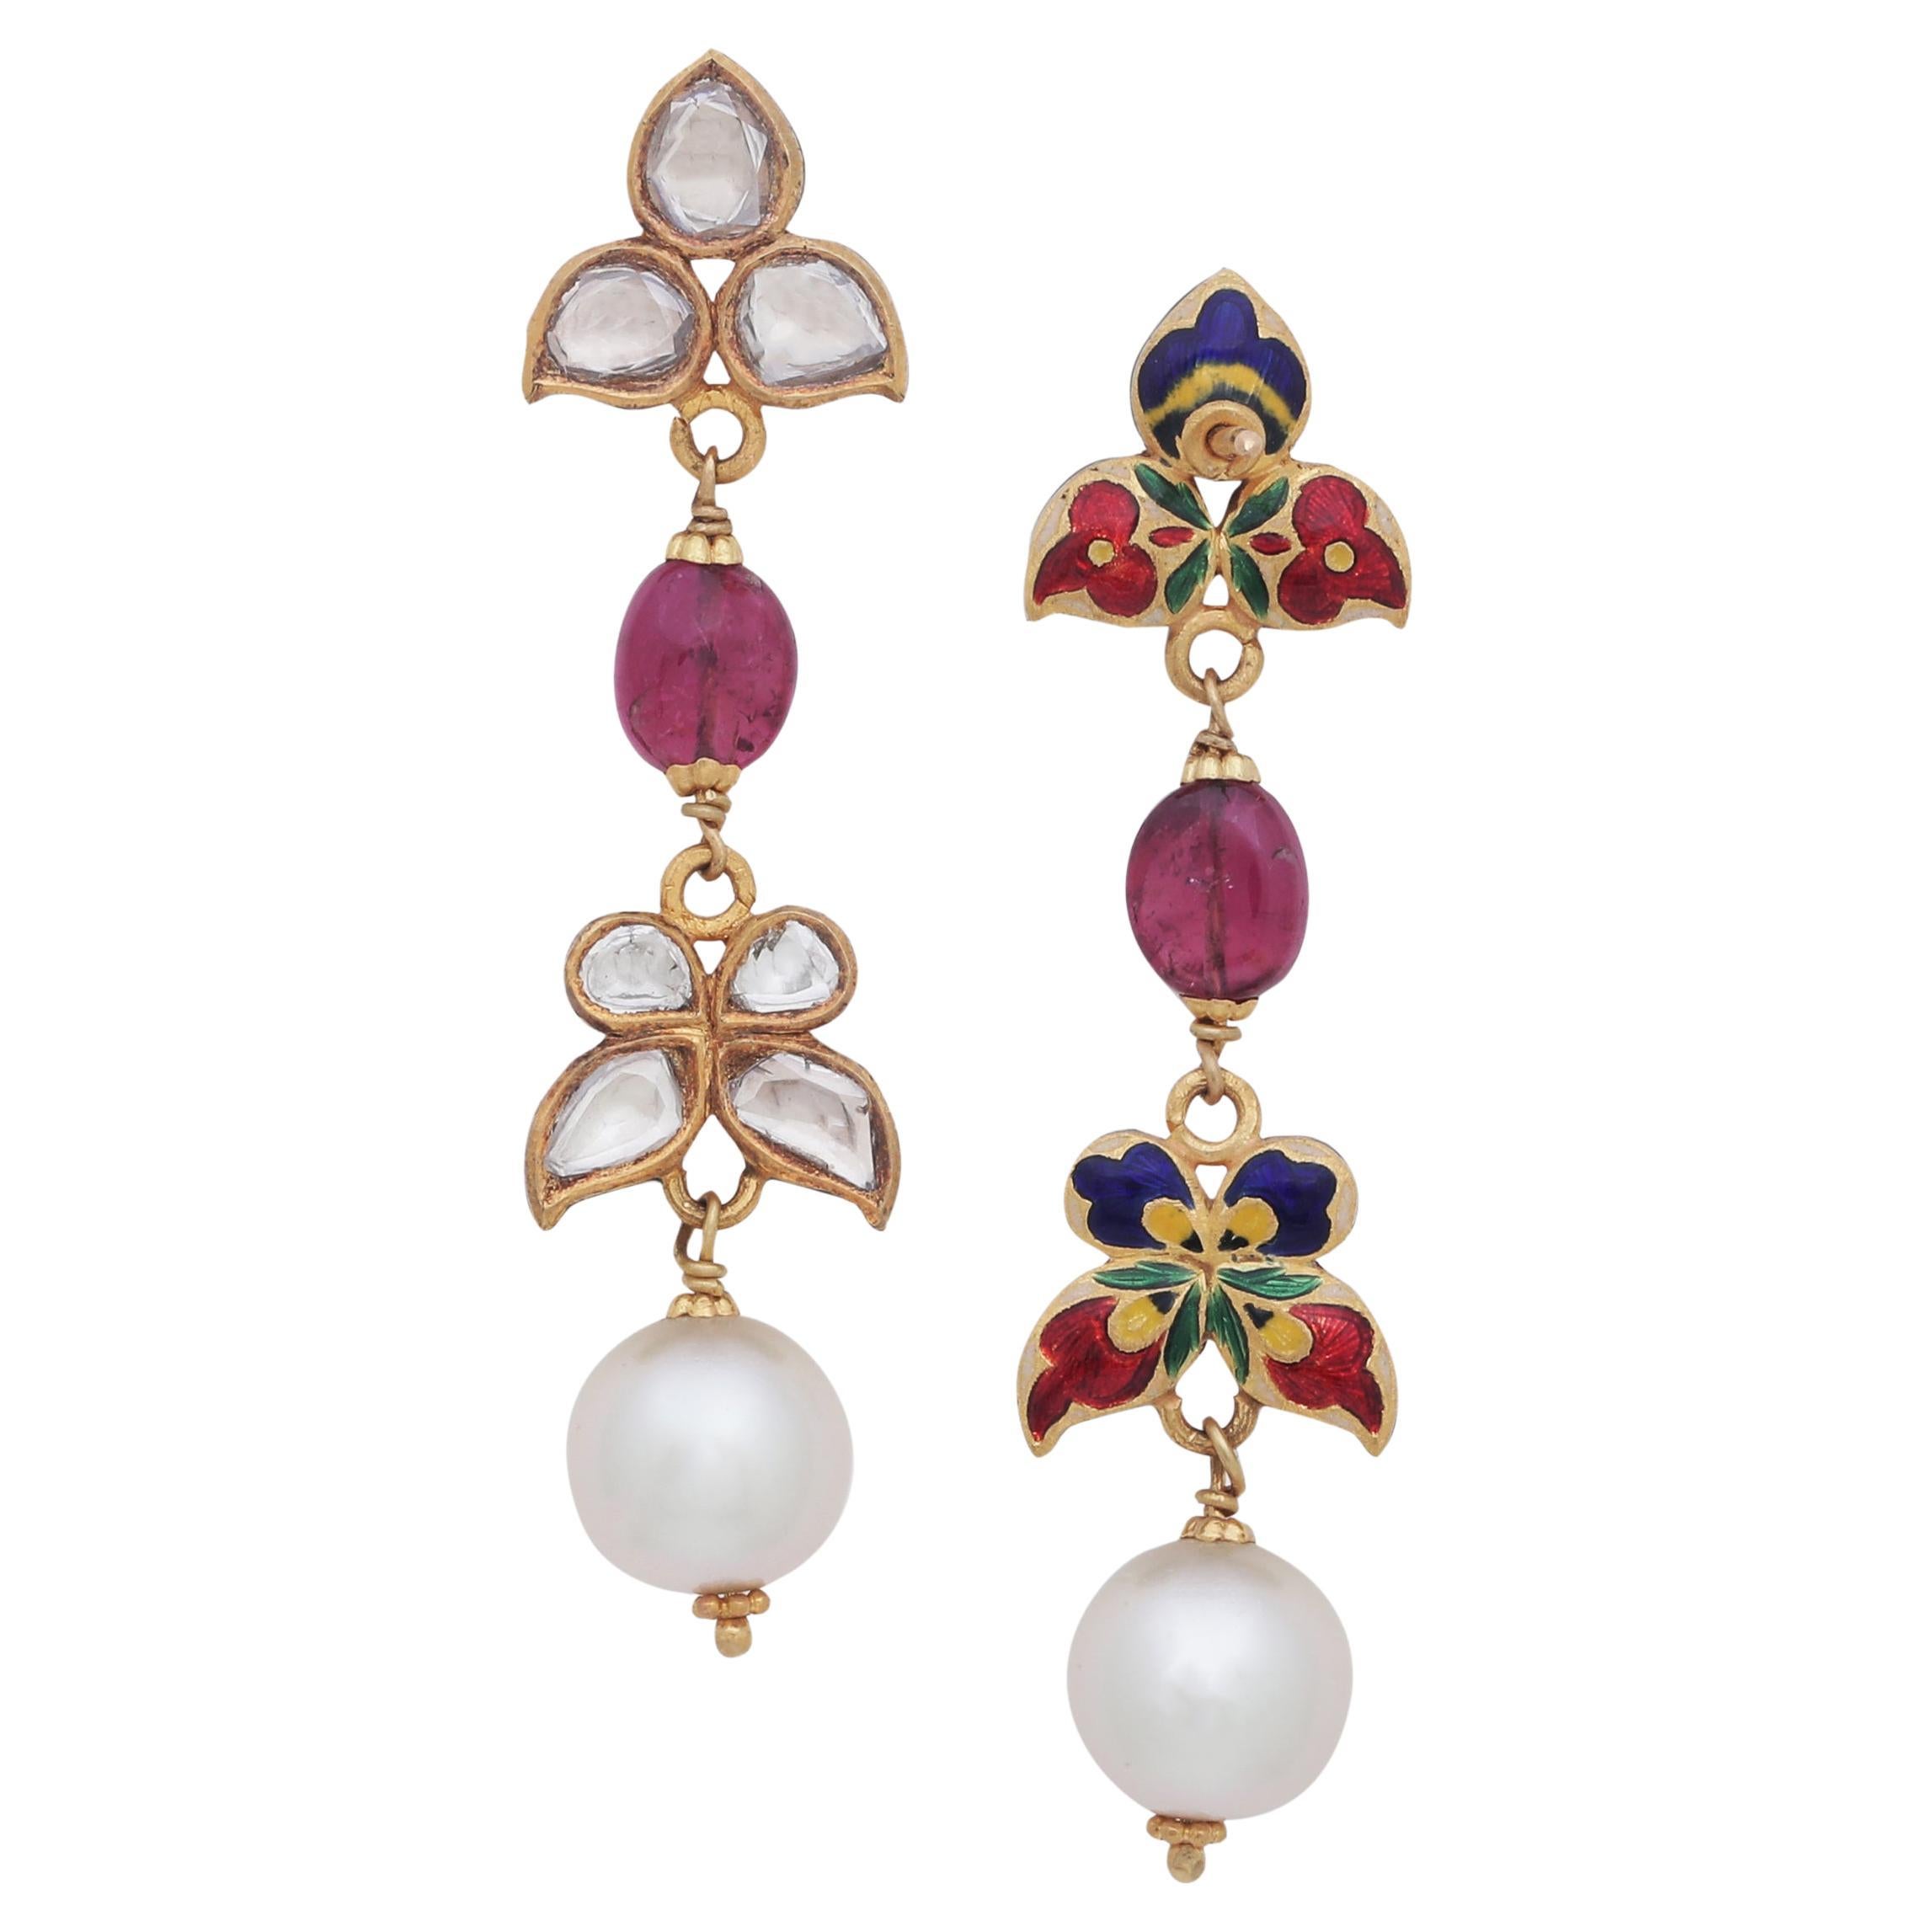 Diamond and Tourmaline earring pair handcrafted in 18K Gold with fine enamel For Sale